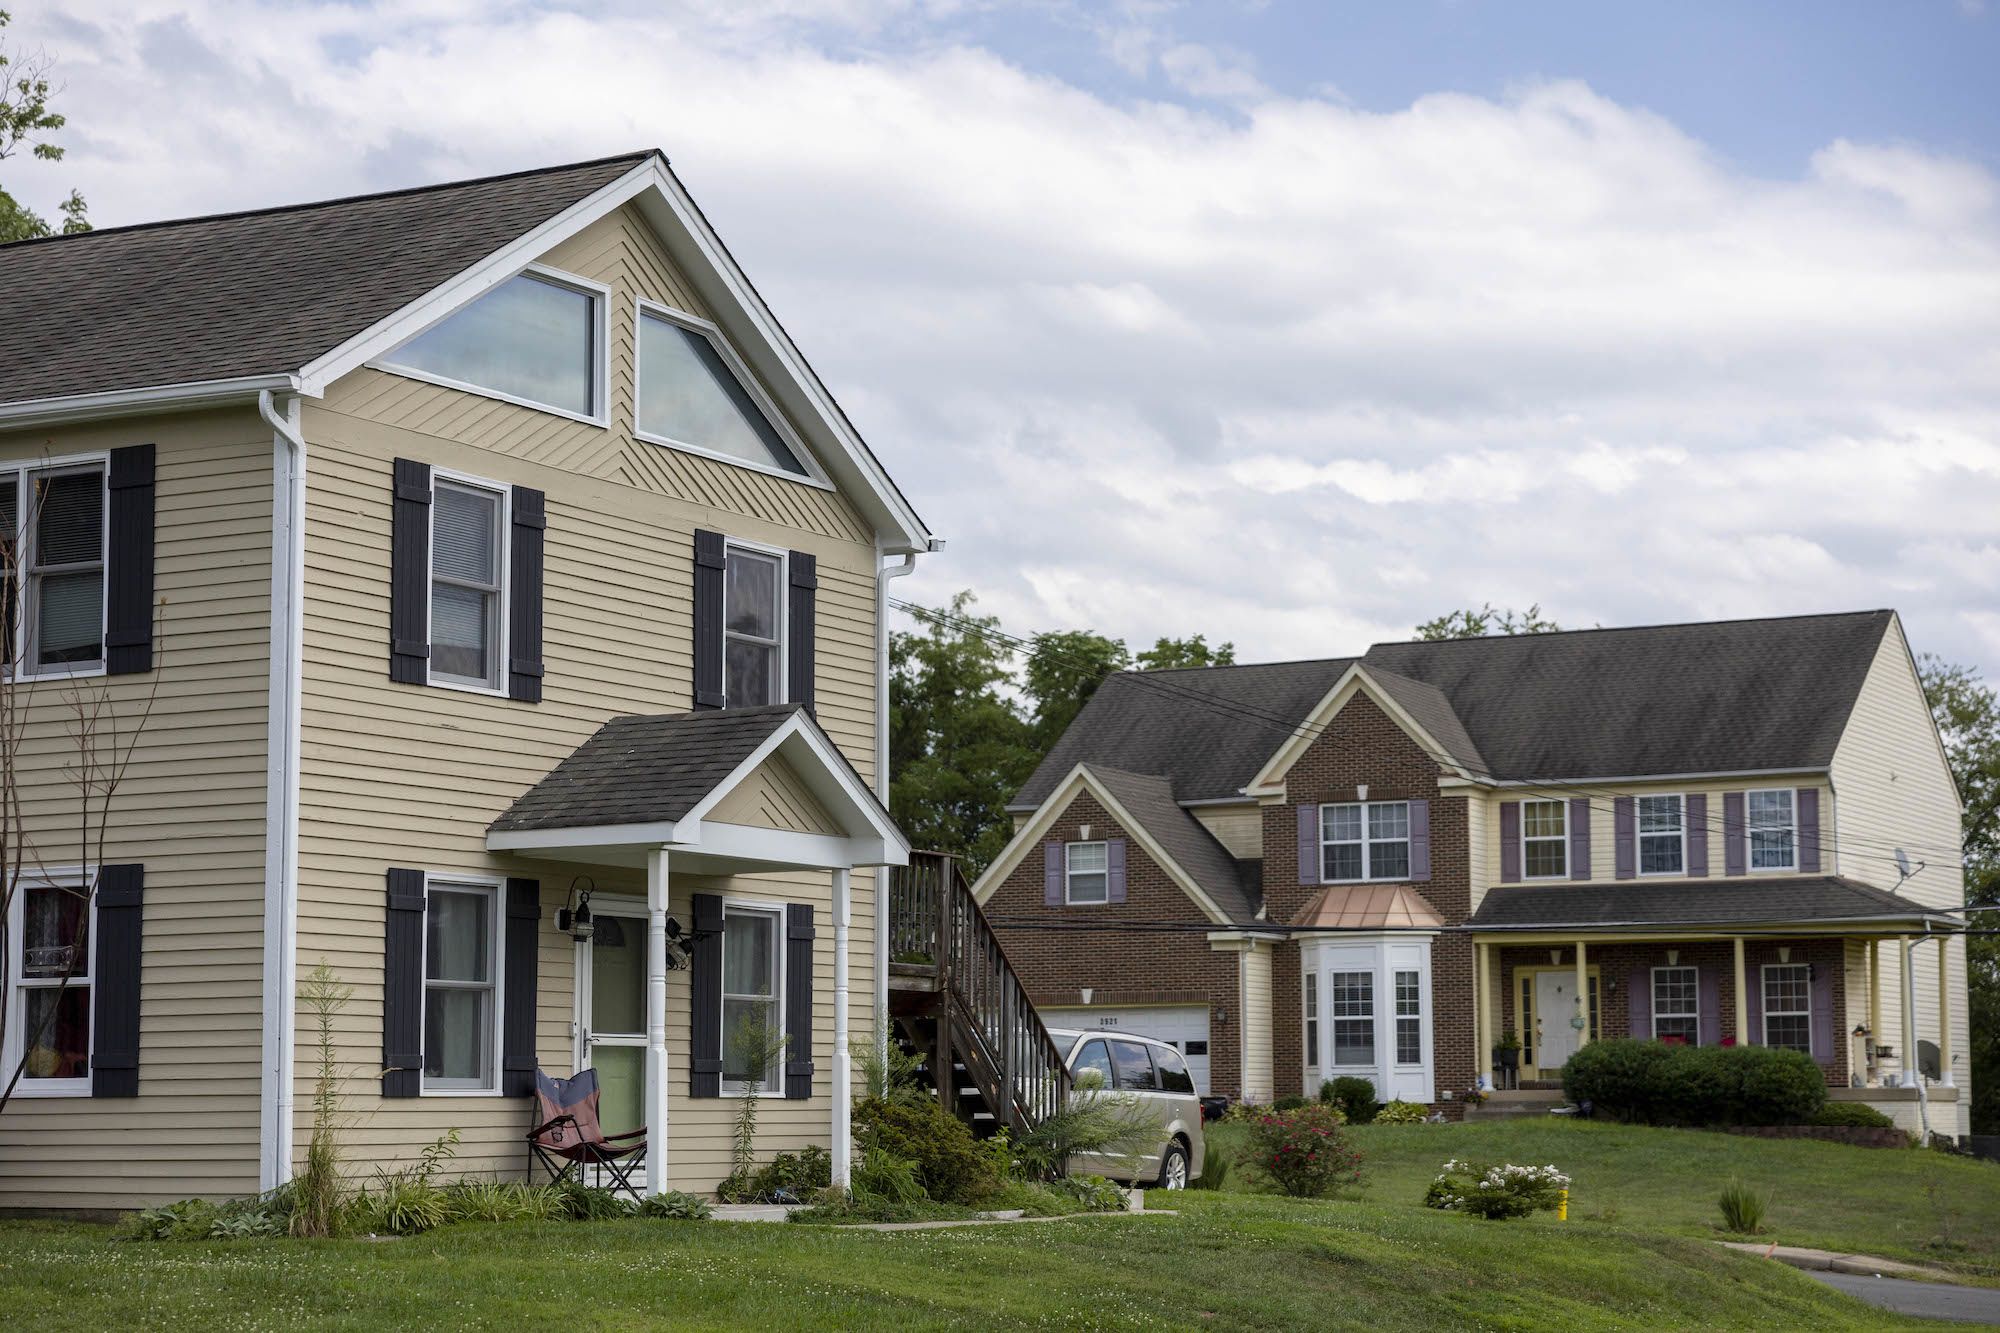 Family Homes VA
Caption:	Single-family homes with ample yards are seen in Dumfries, Virginia, on Au...